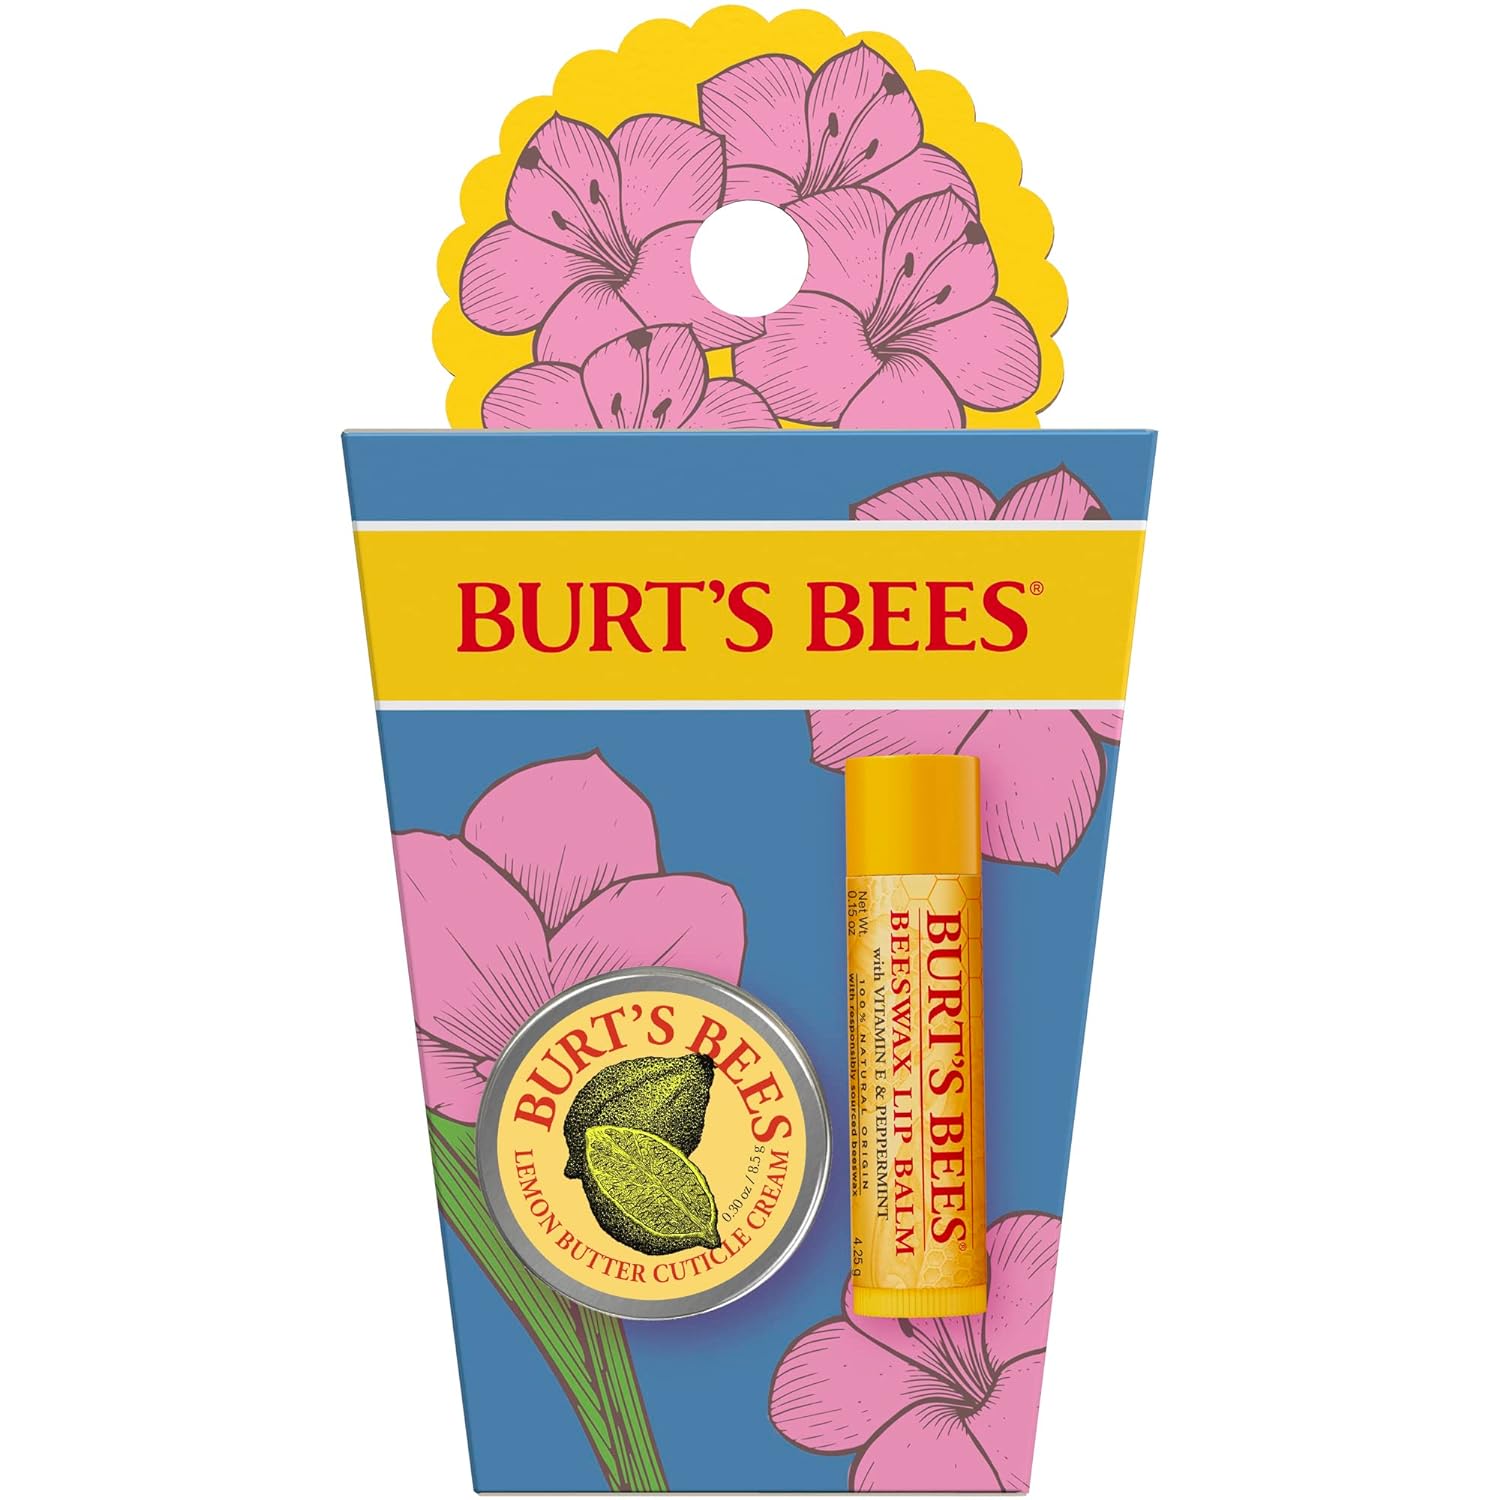 Burt \ 's Bees Gift Set for Lips and Hands, Beeswax Lip Balm and Mini Cuticle Cream, Spring Surprise Limited Edition, Pack of 1